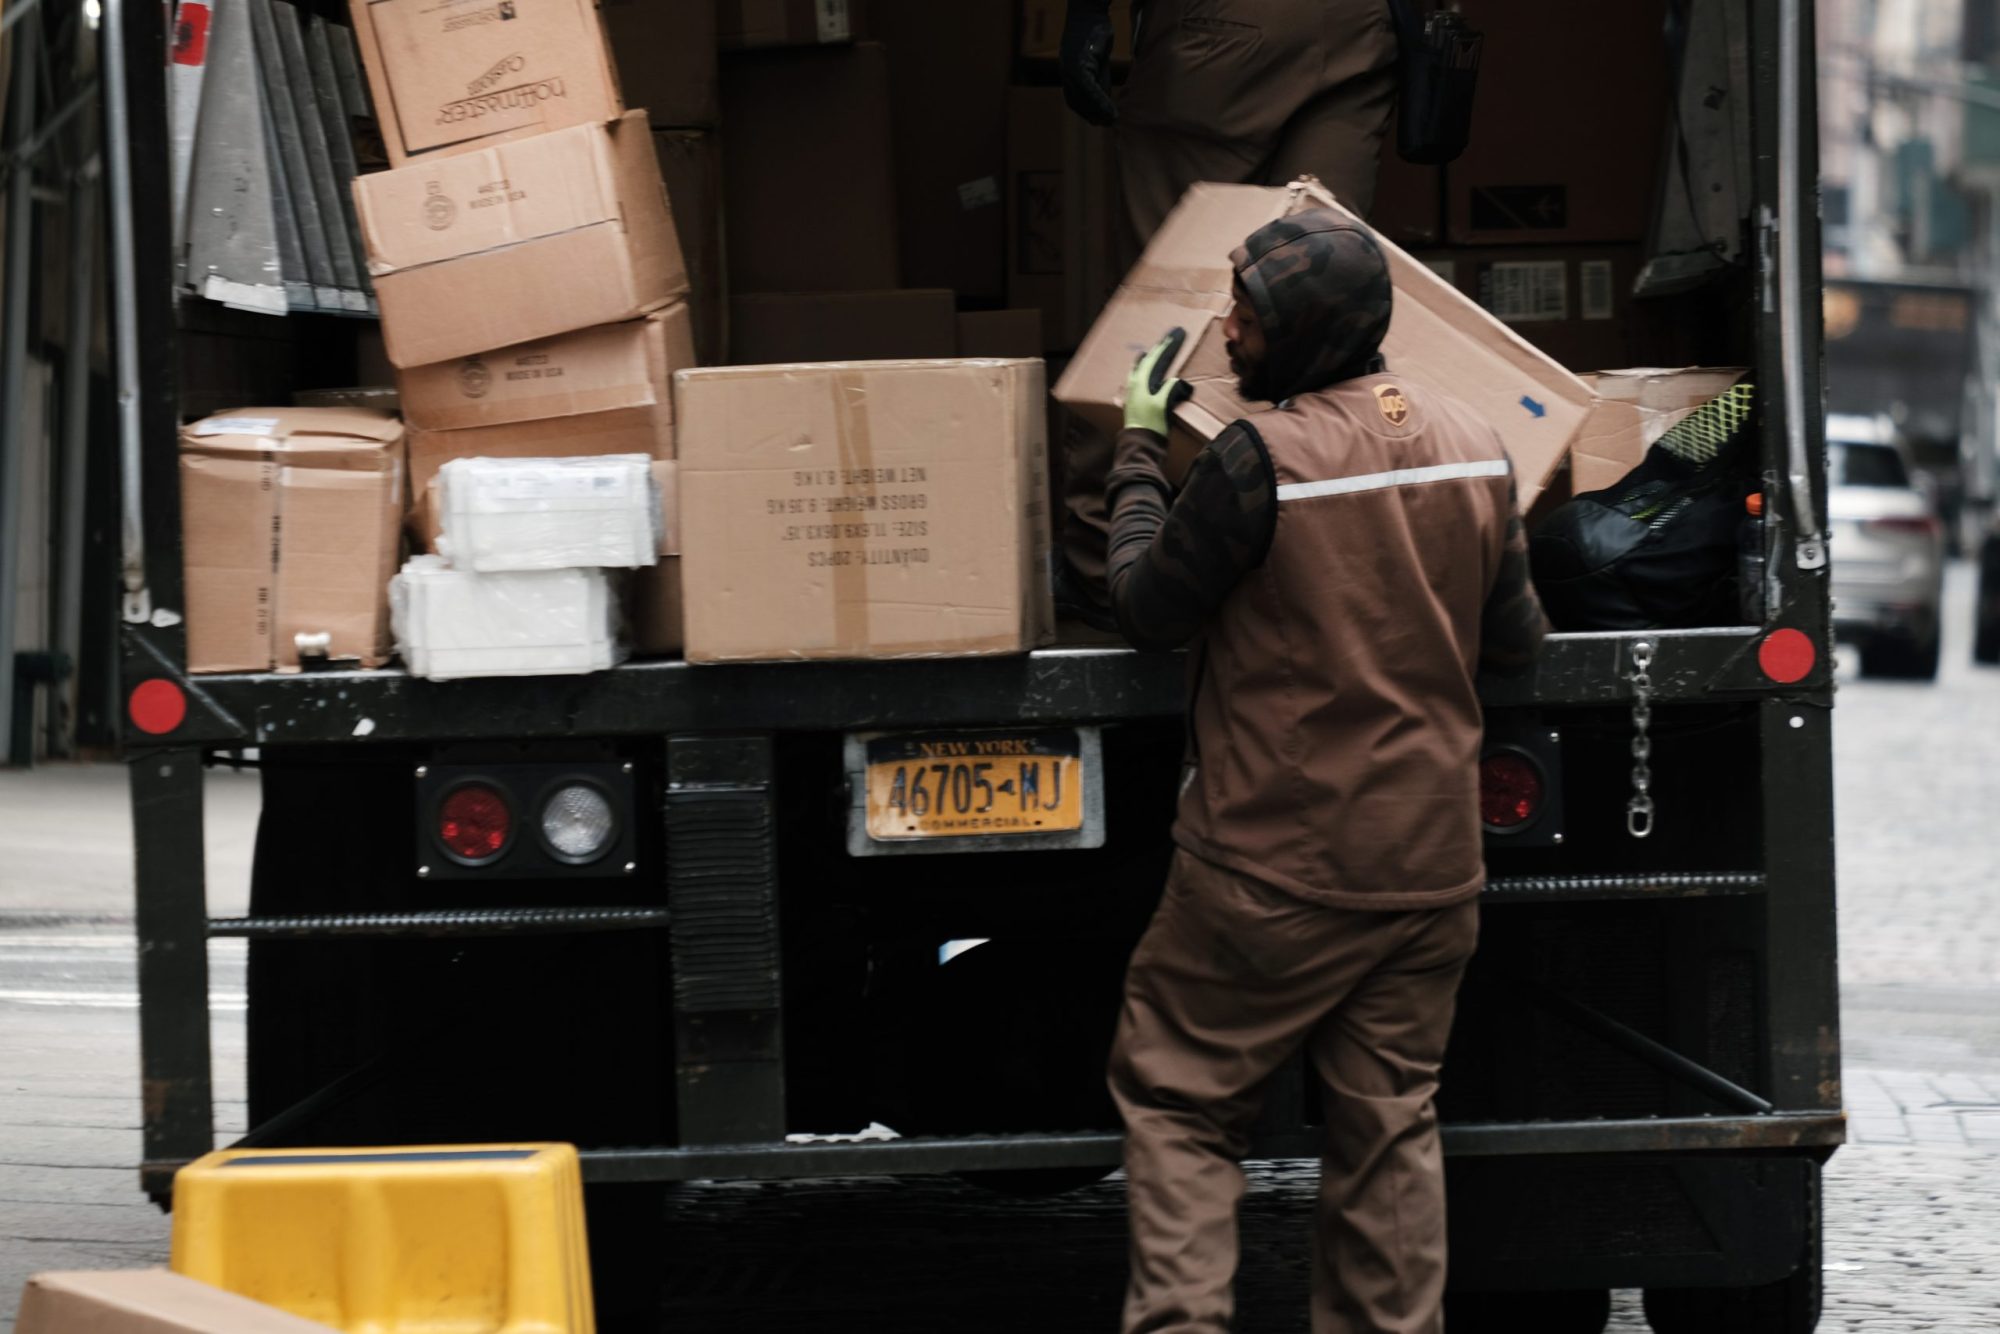 A UPS delivery driver unloads packages out of the back of a delivery truck.